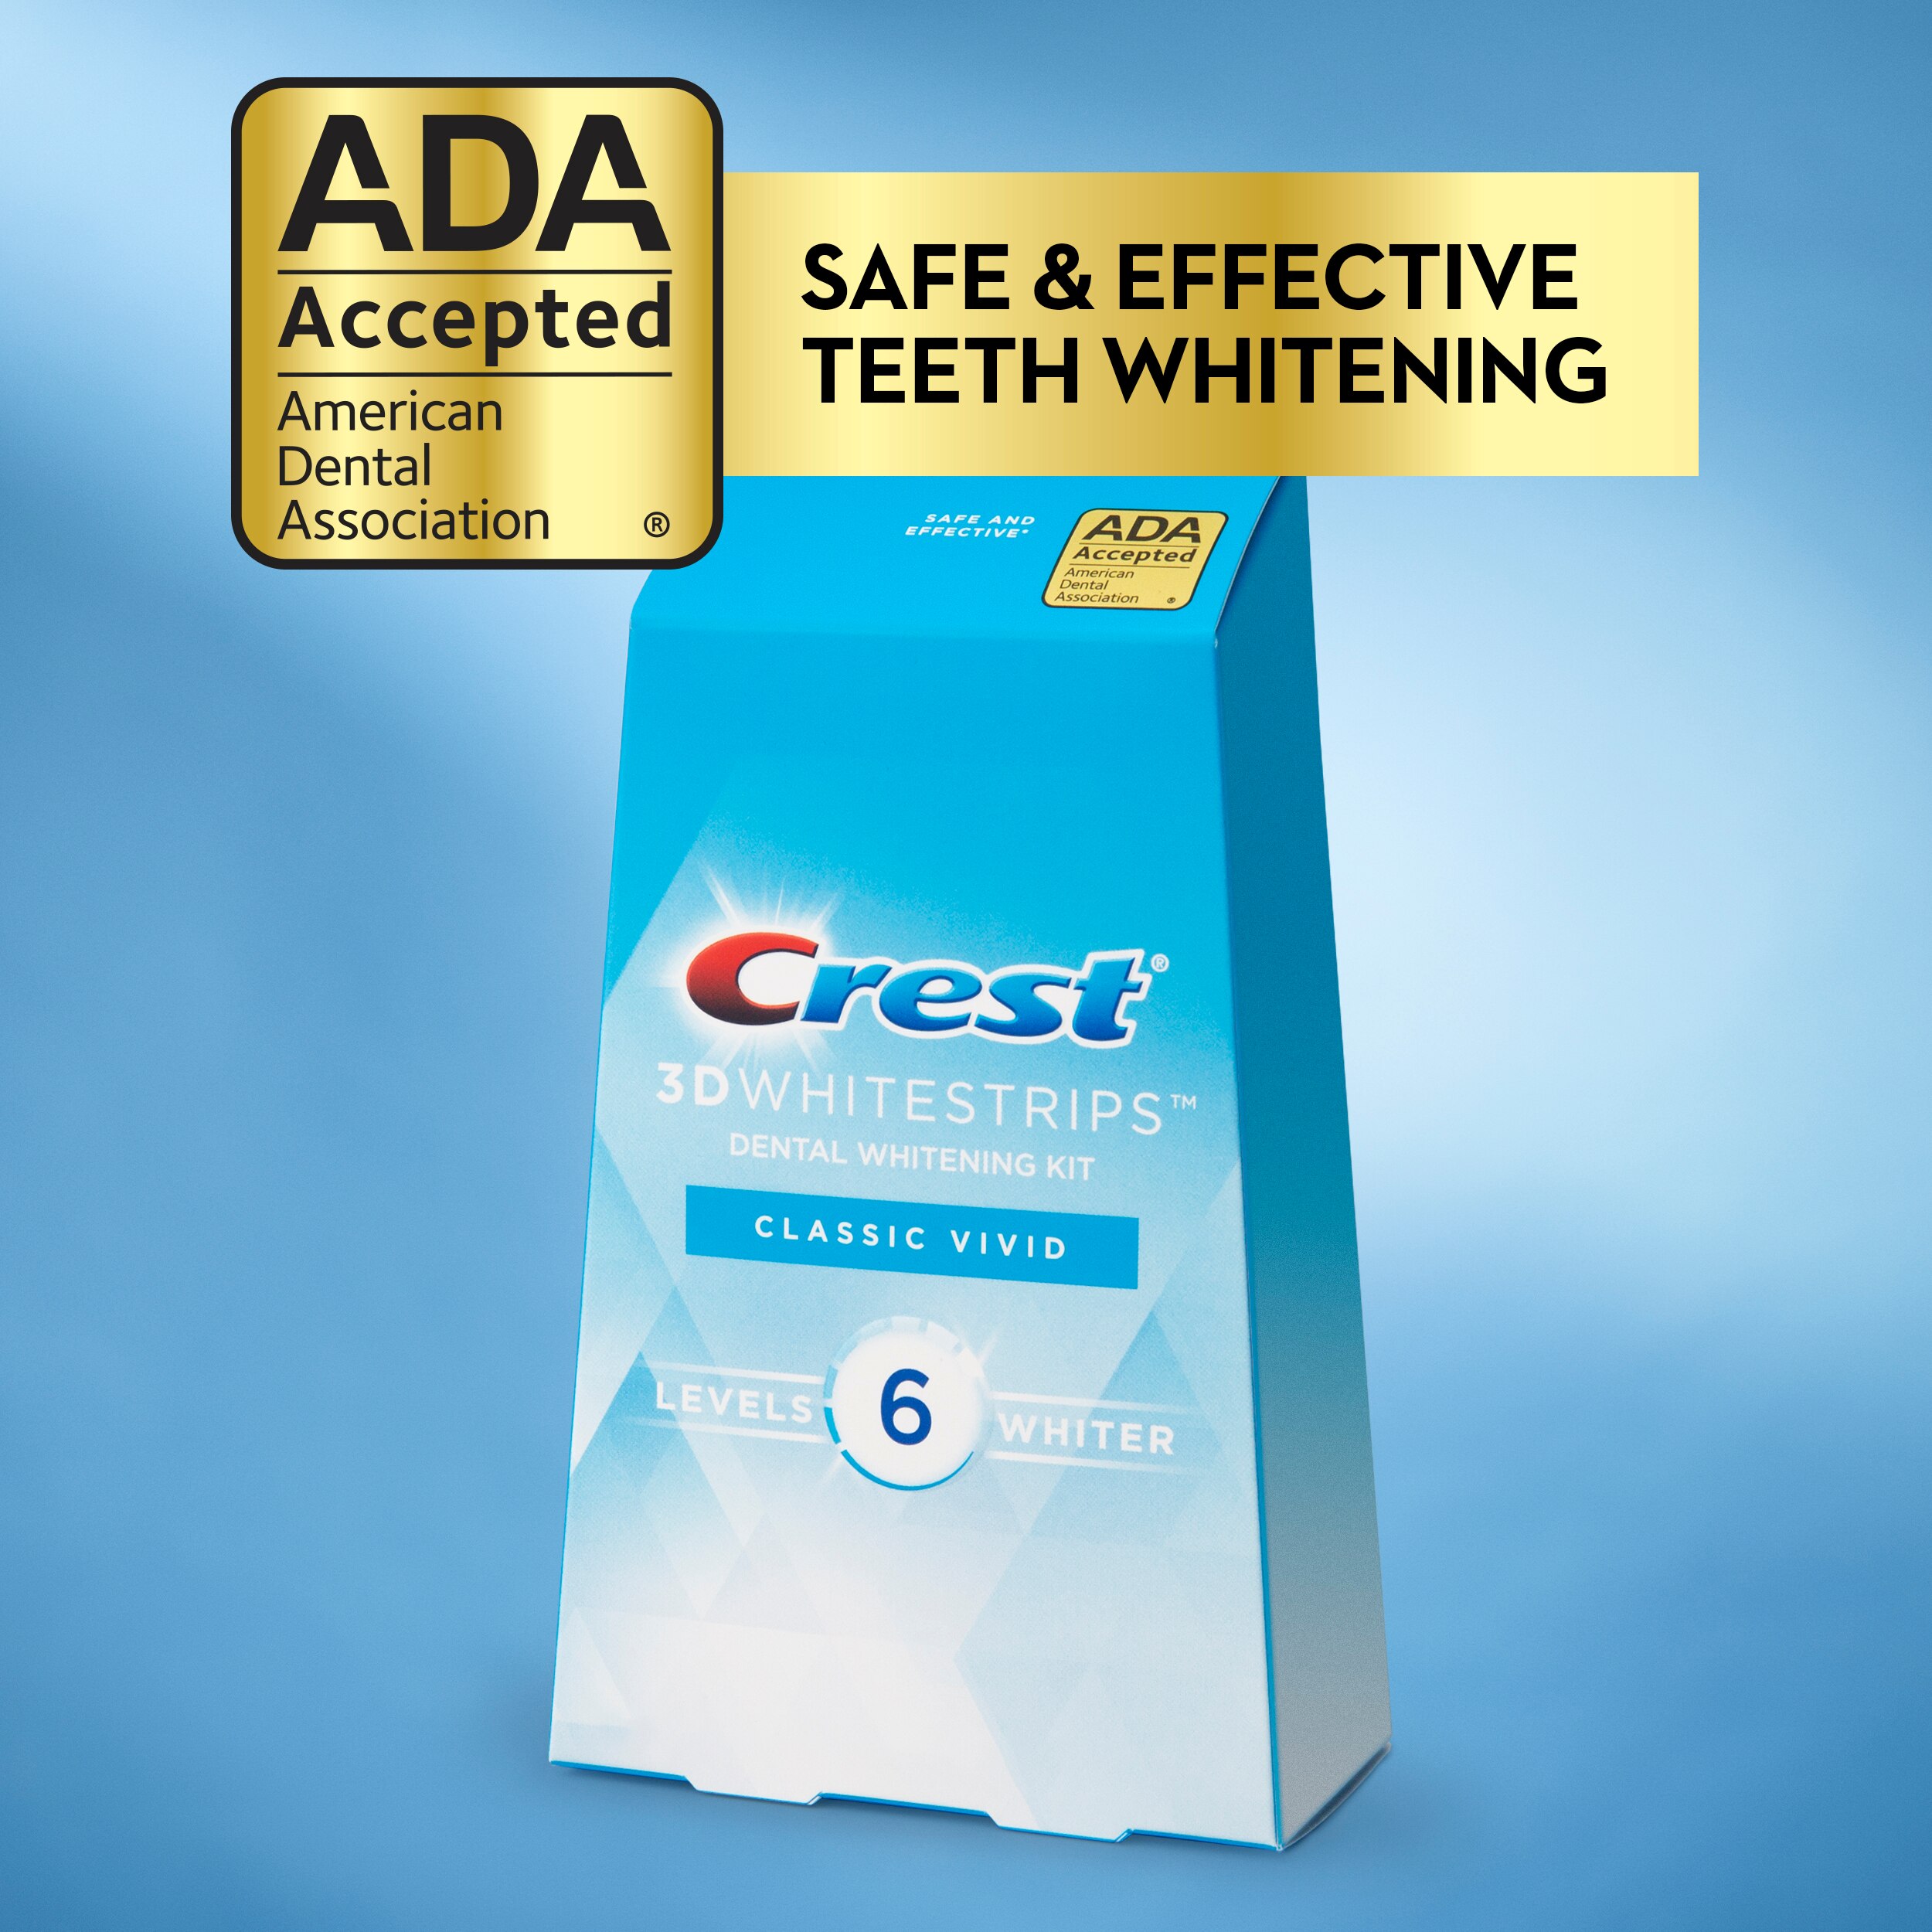 Subsidy somersault Children Center Crest 3DWhitestrips Classic Vivid At-home Teeth Whitening Kit, 10  Treatments, 6 Levels Whiter | Pick Up In Store TODAY at CVS